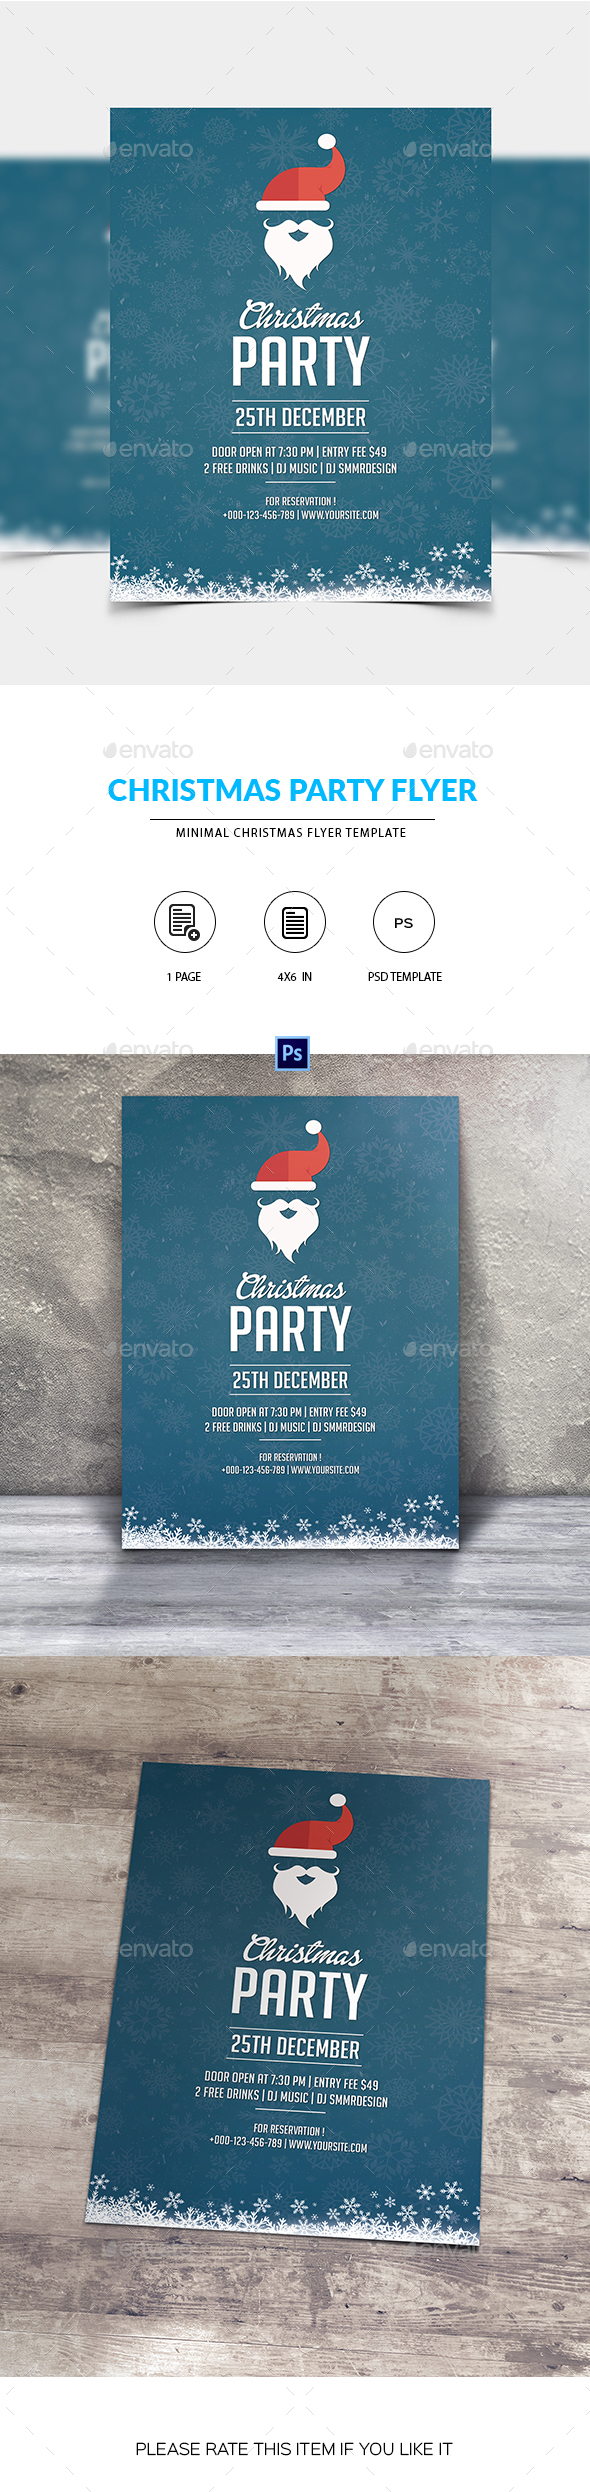 Santa Christmas Party Flyer - Clubs & Parties Events